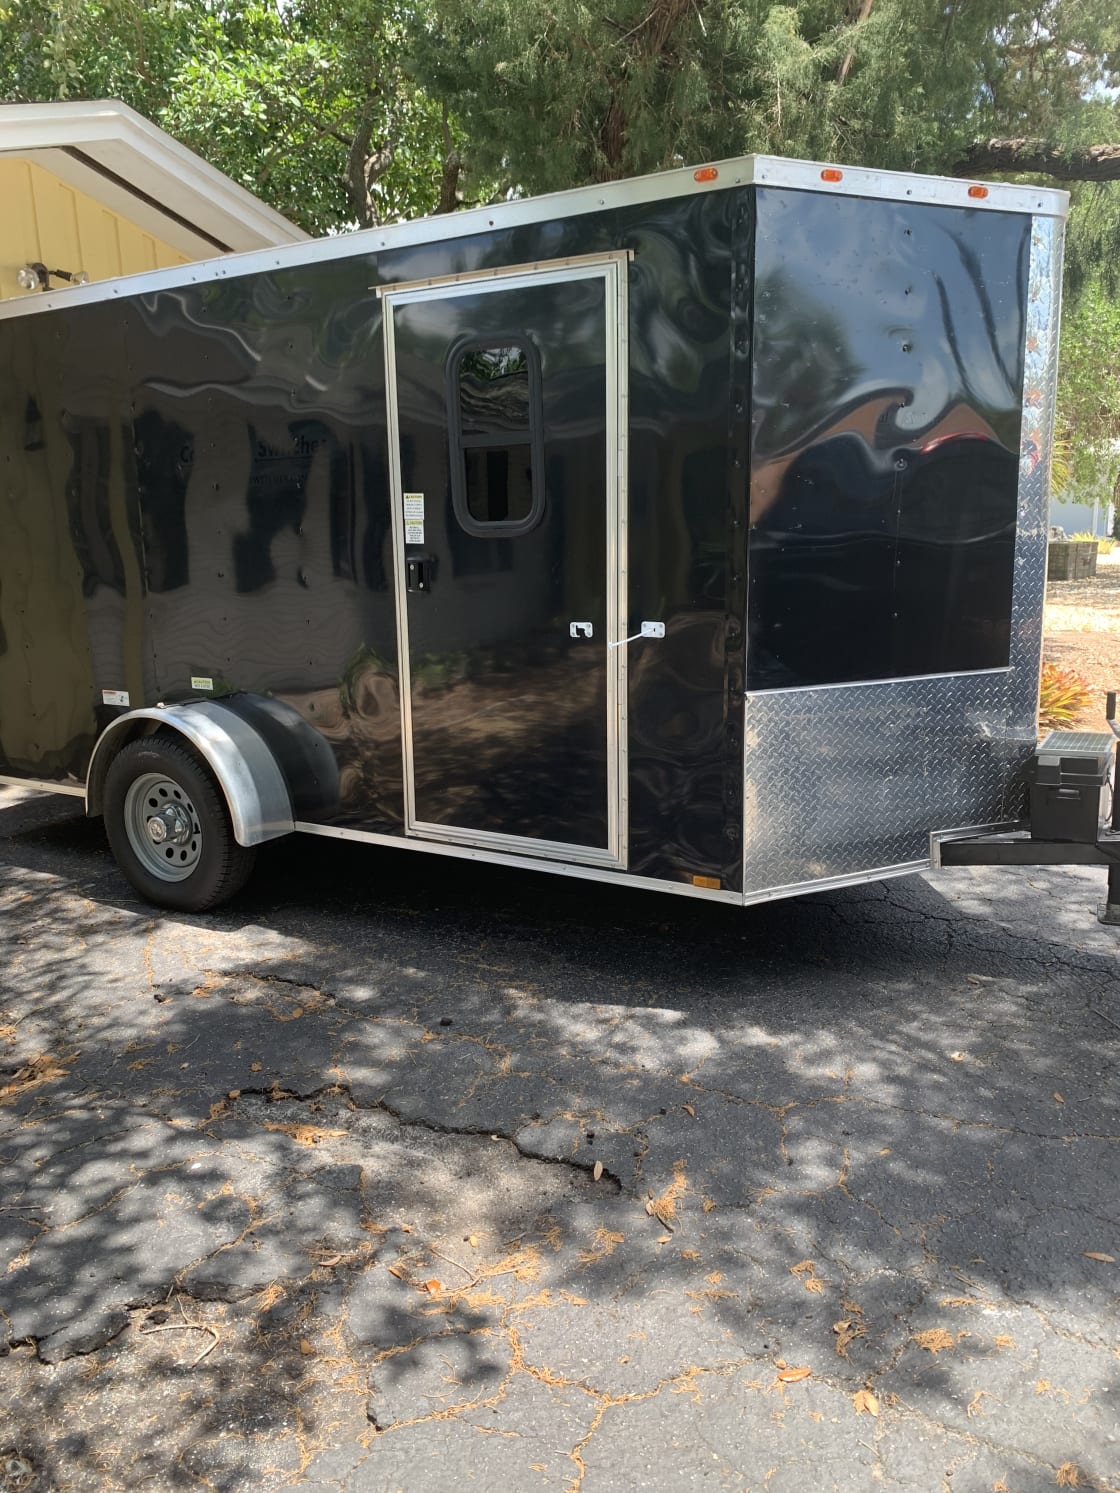 Bathroom Trailer that is available